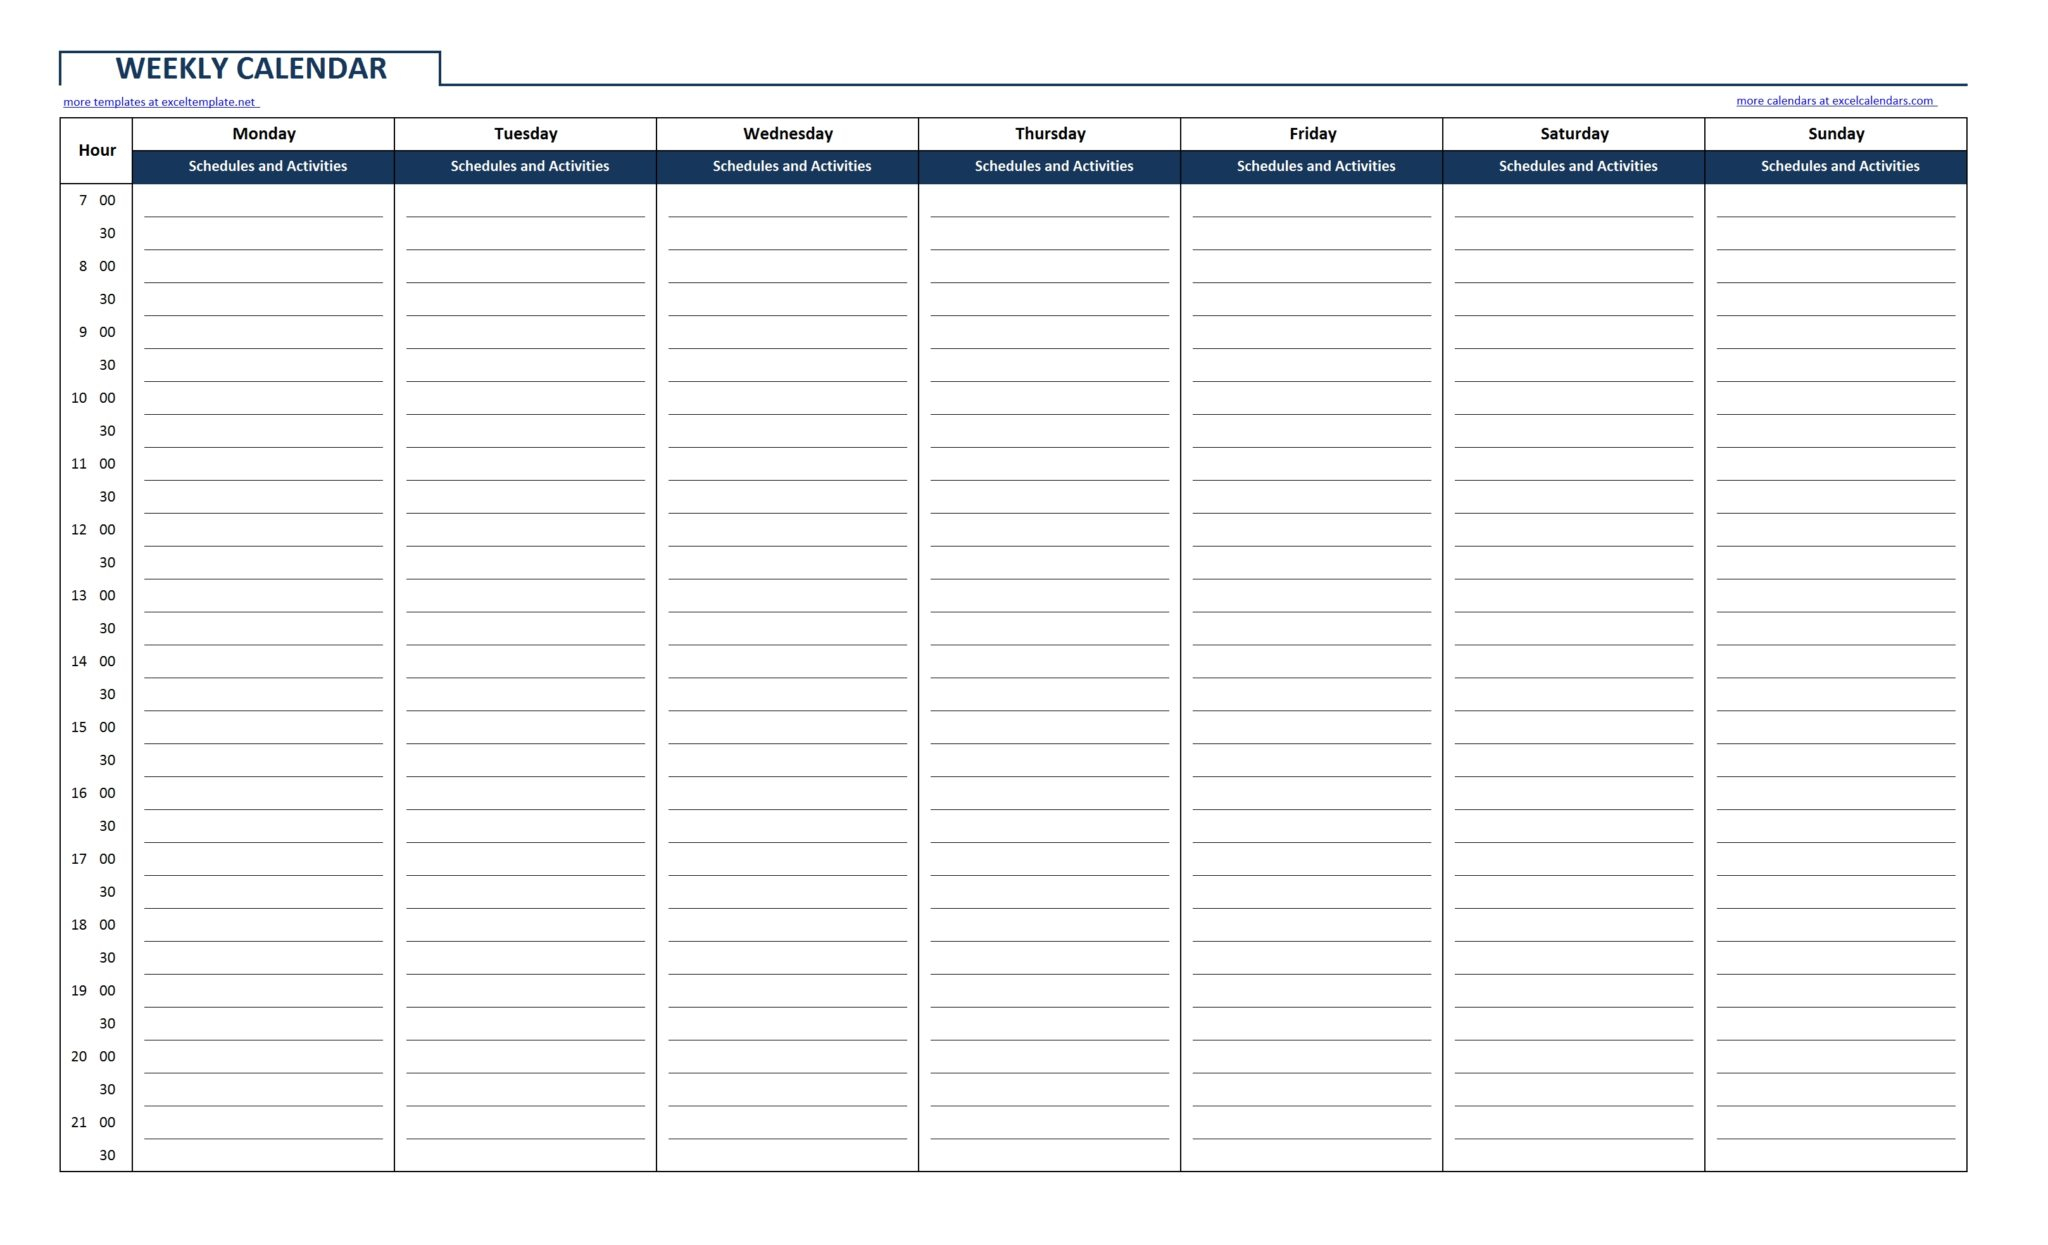 Free Blank Spreadsheet Within Free Blank Inventory Sheet Printable Mar Sheets Time Budget